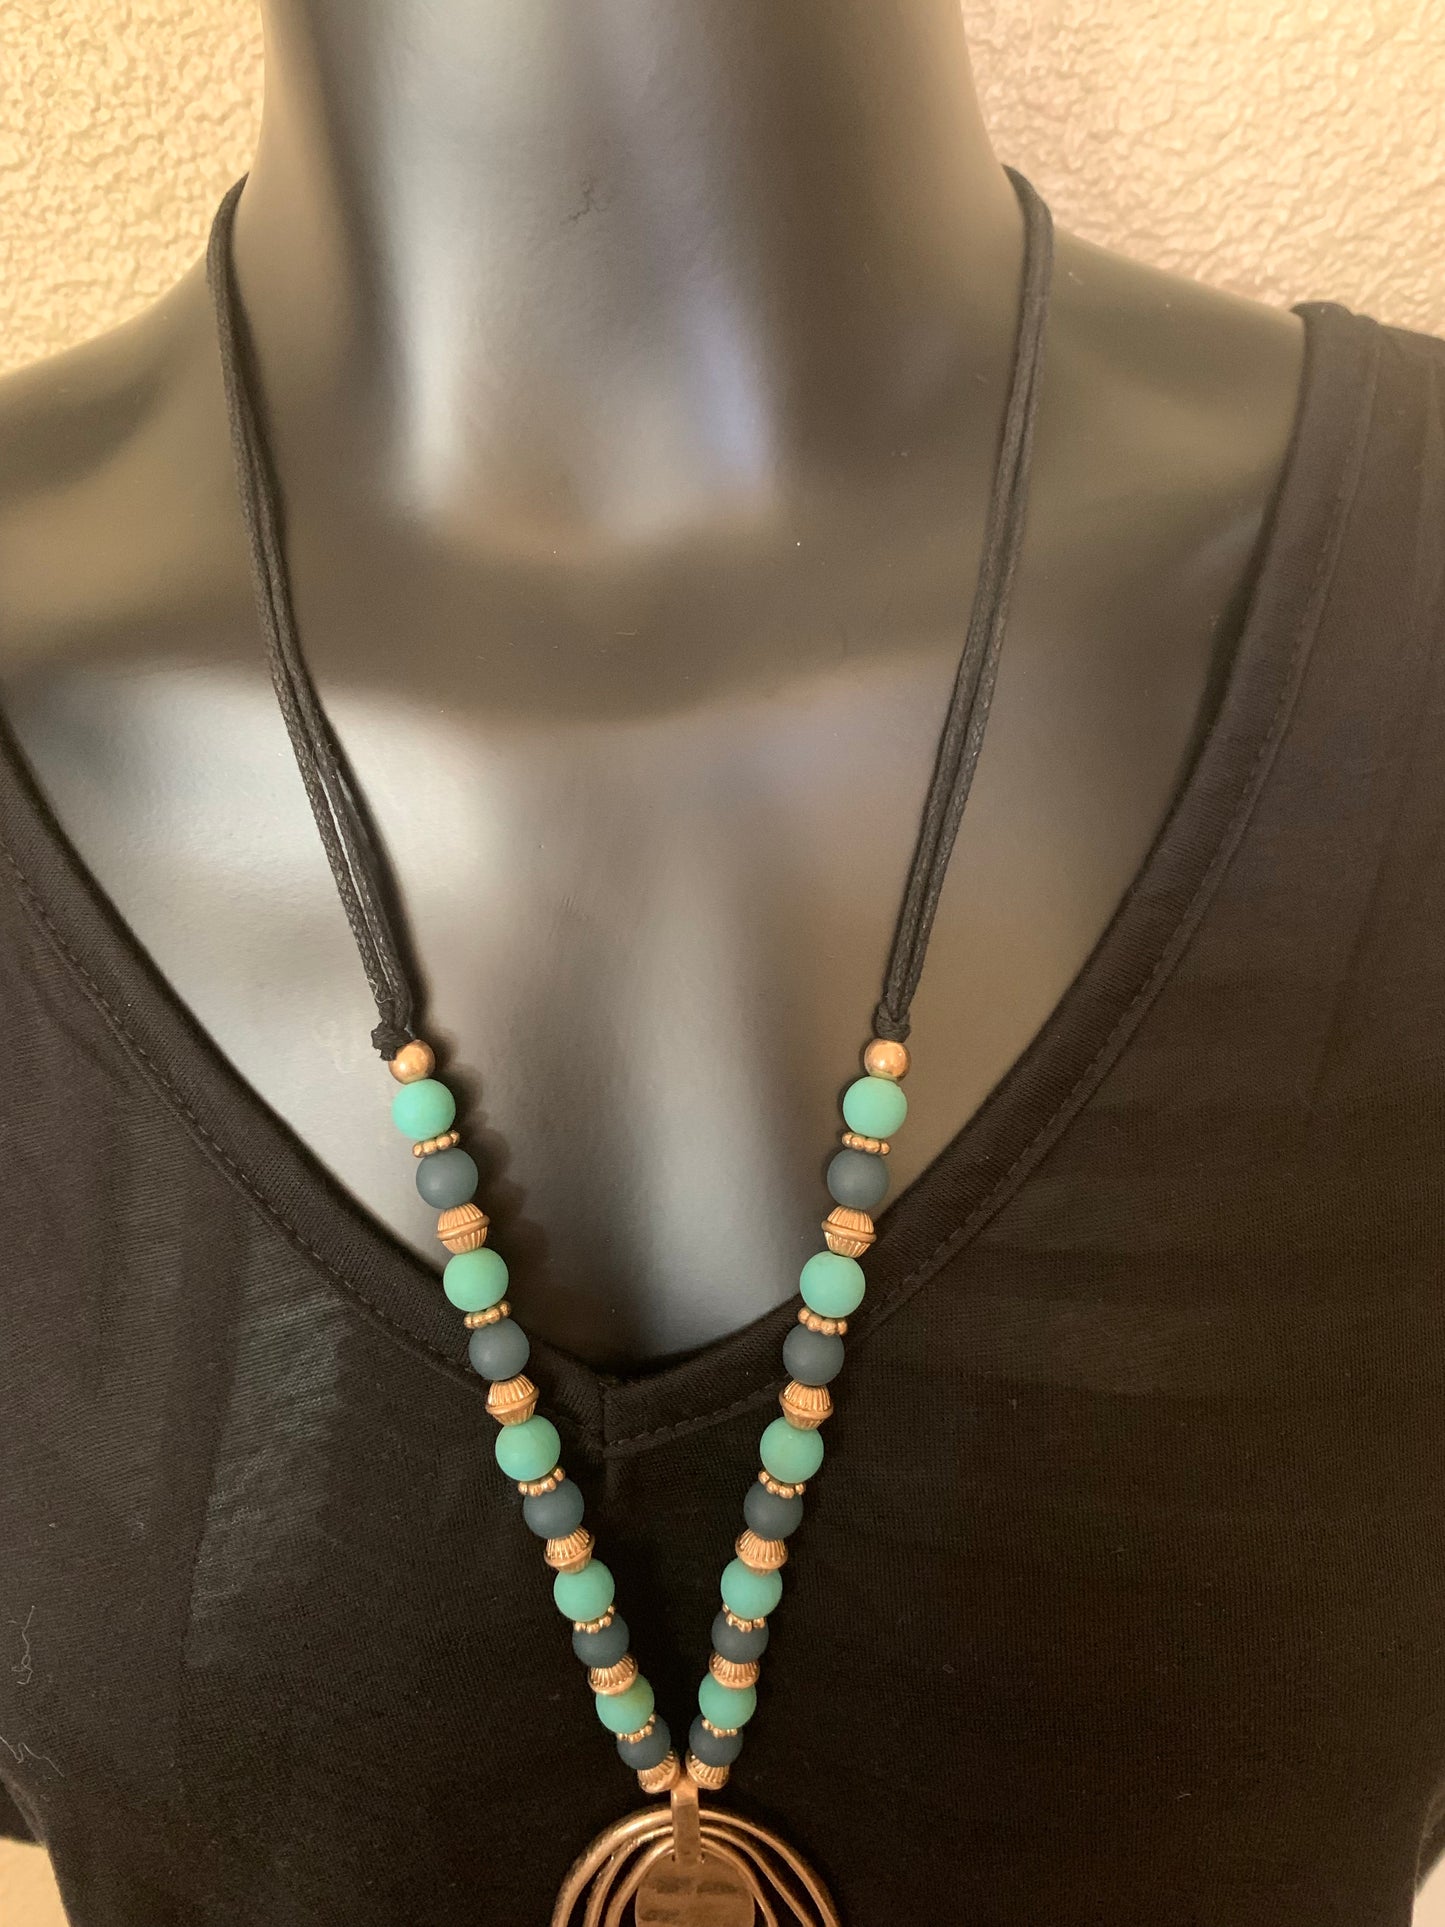 Long oval beaded necklace set